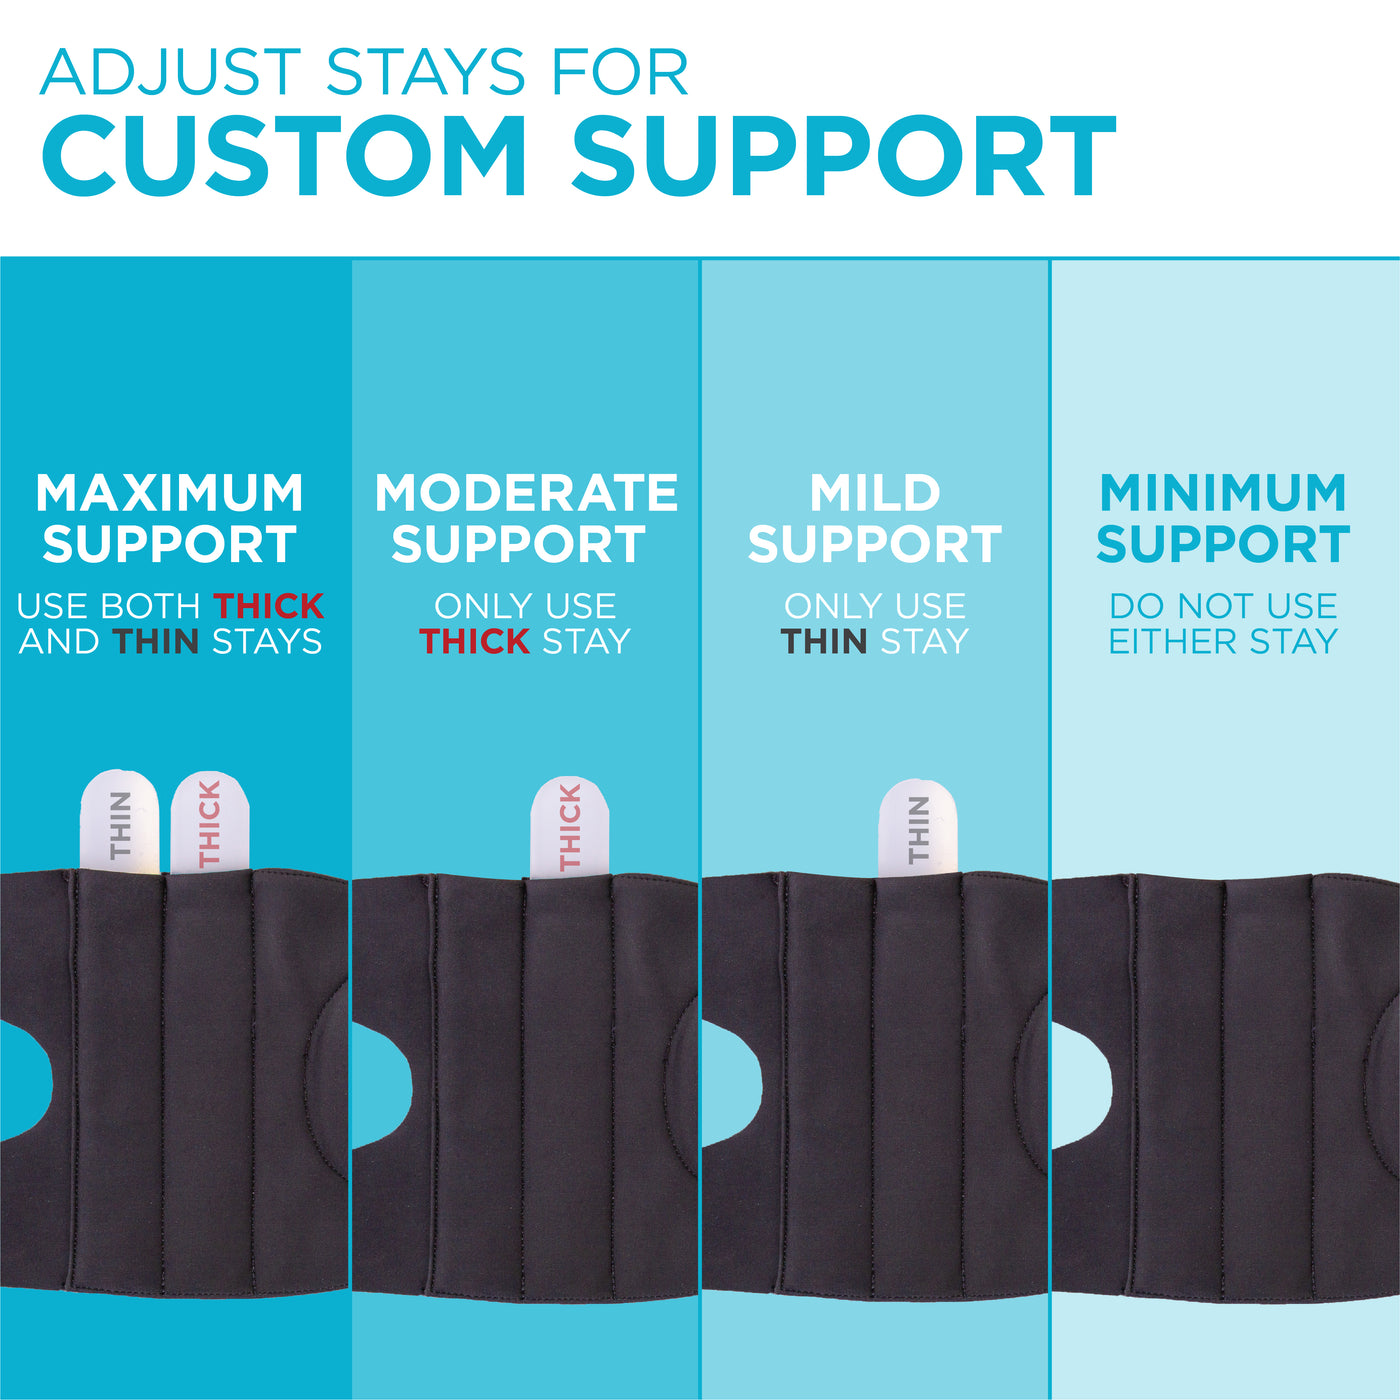 The cubital tunnel pinched nerve splint comes with two different splints for four different levels of customizable support